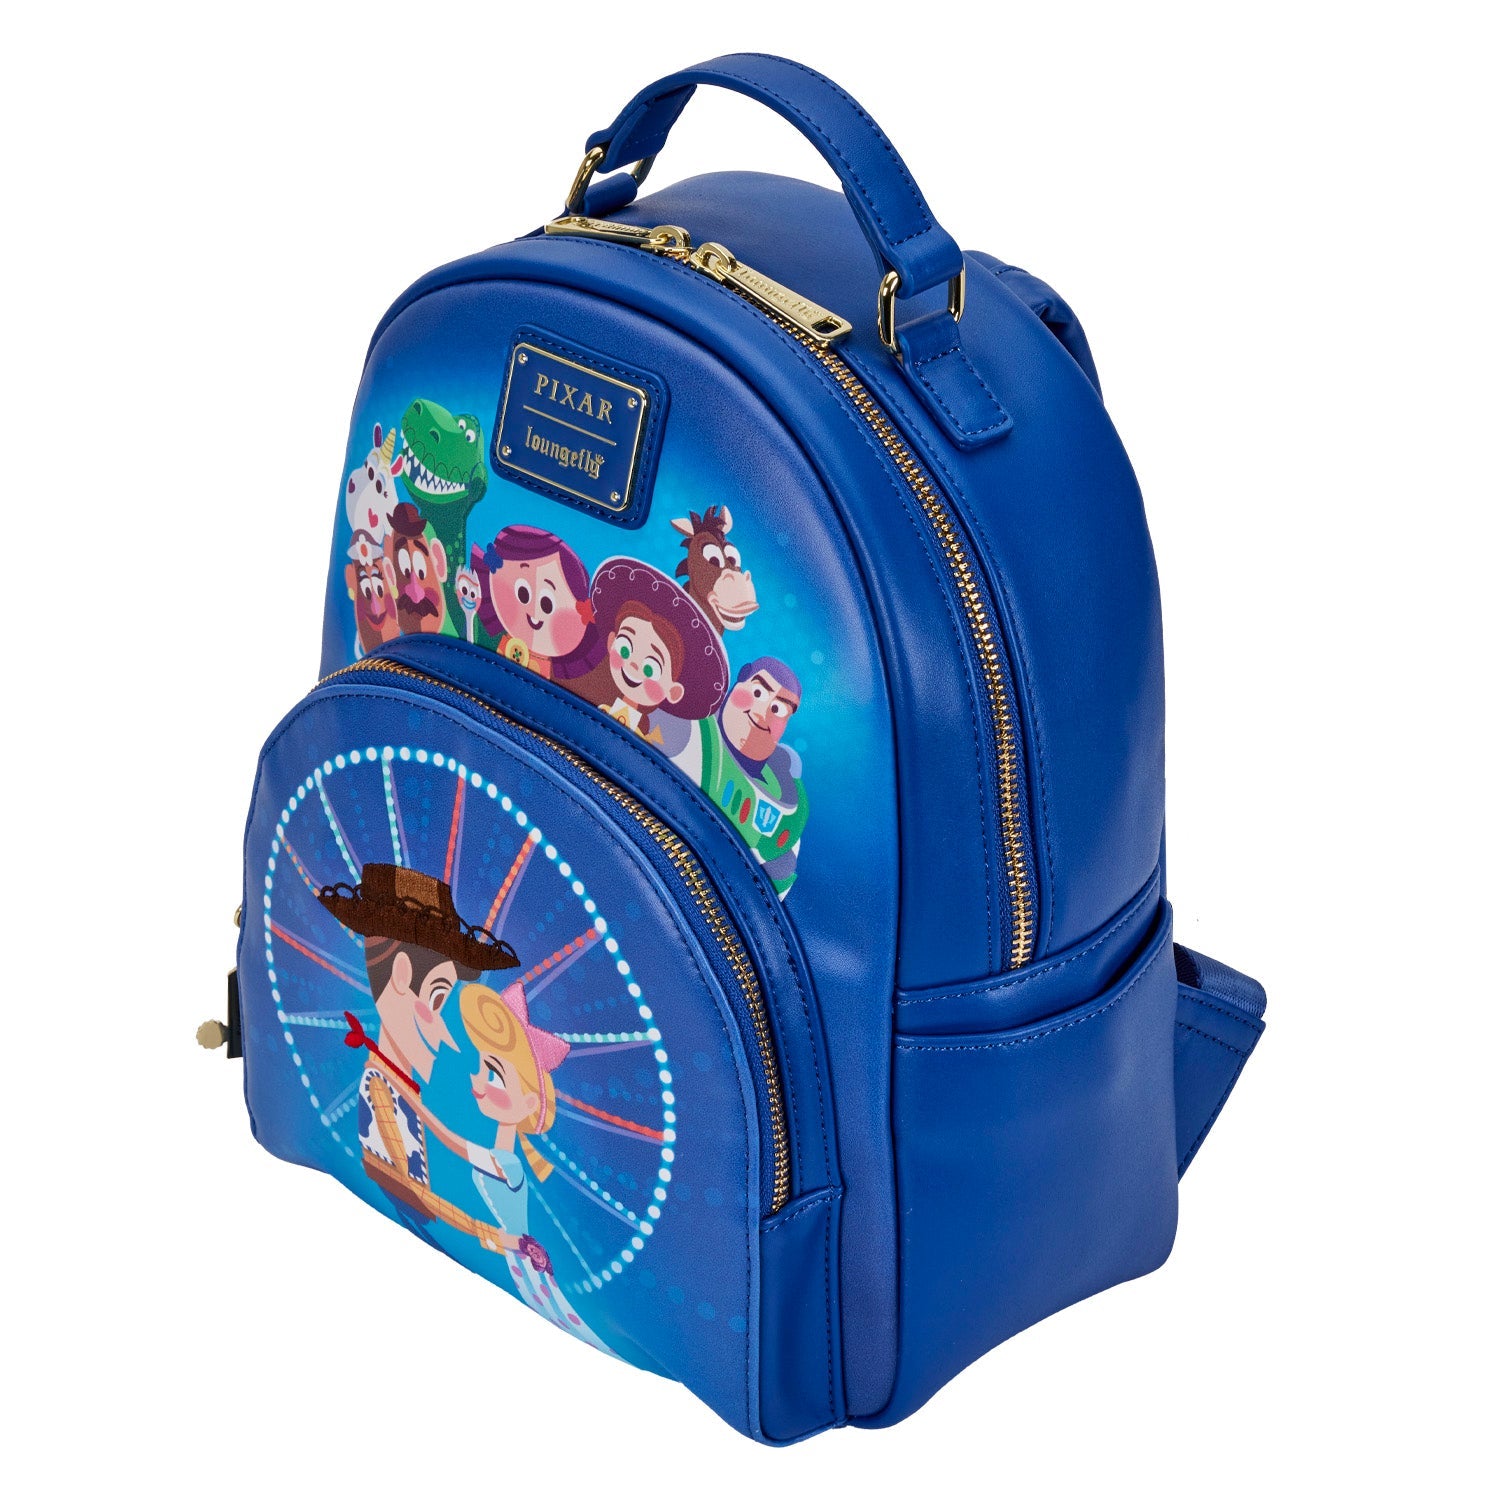 Loungefly Pixar Toy Story Woody Bo Peep Mini Backpack.  Available at Blue Culture Tees!